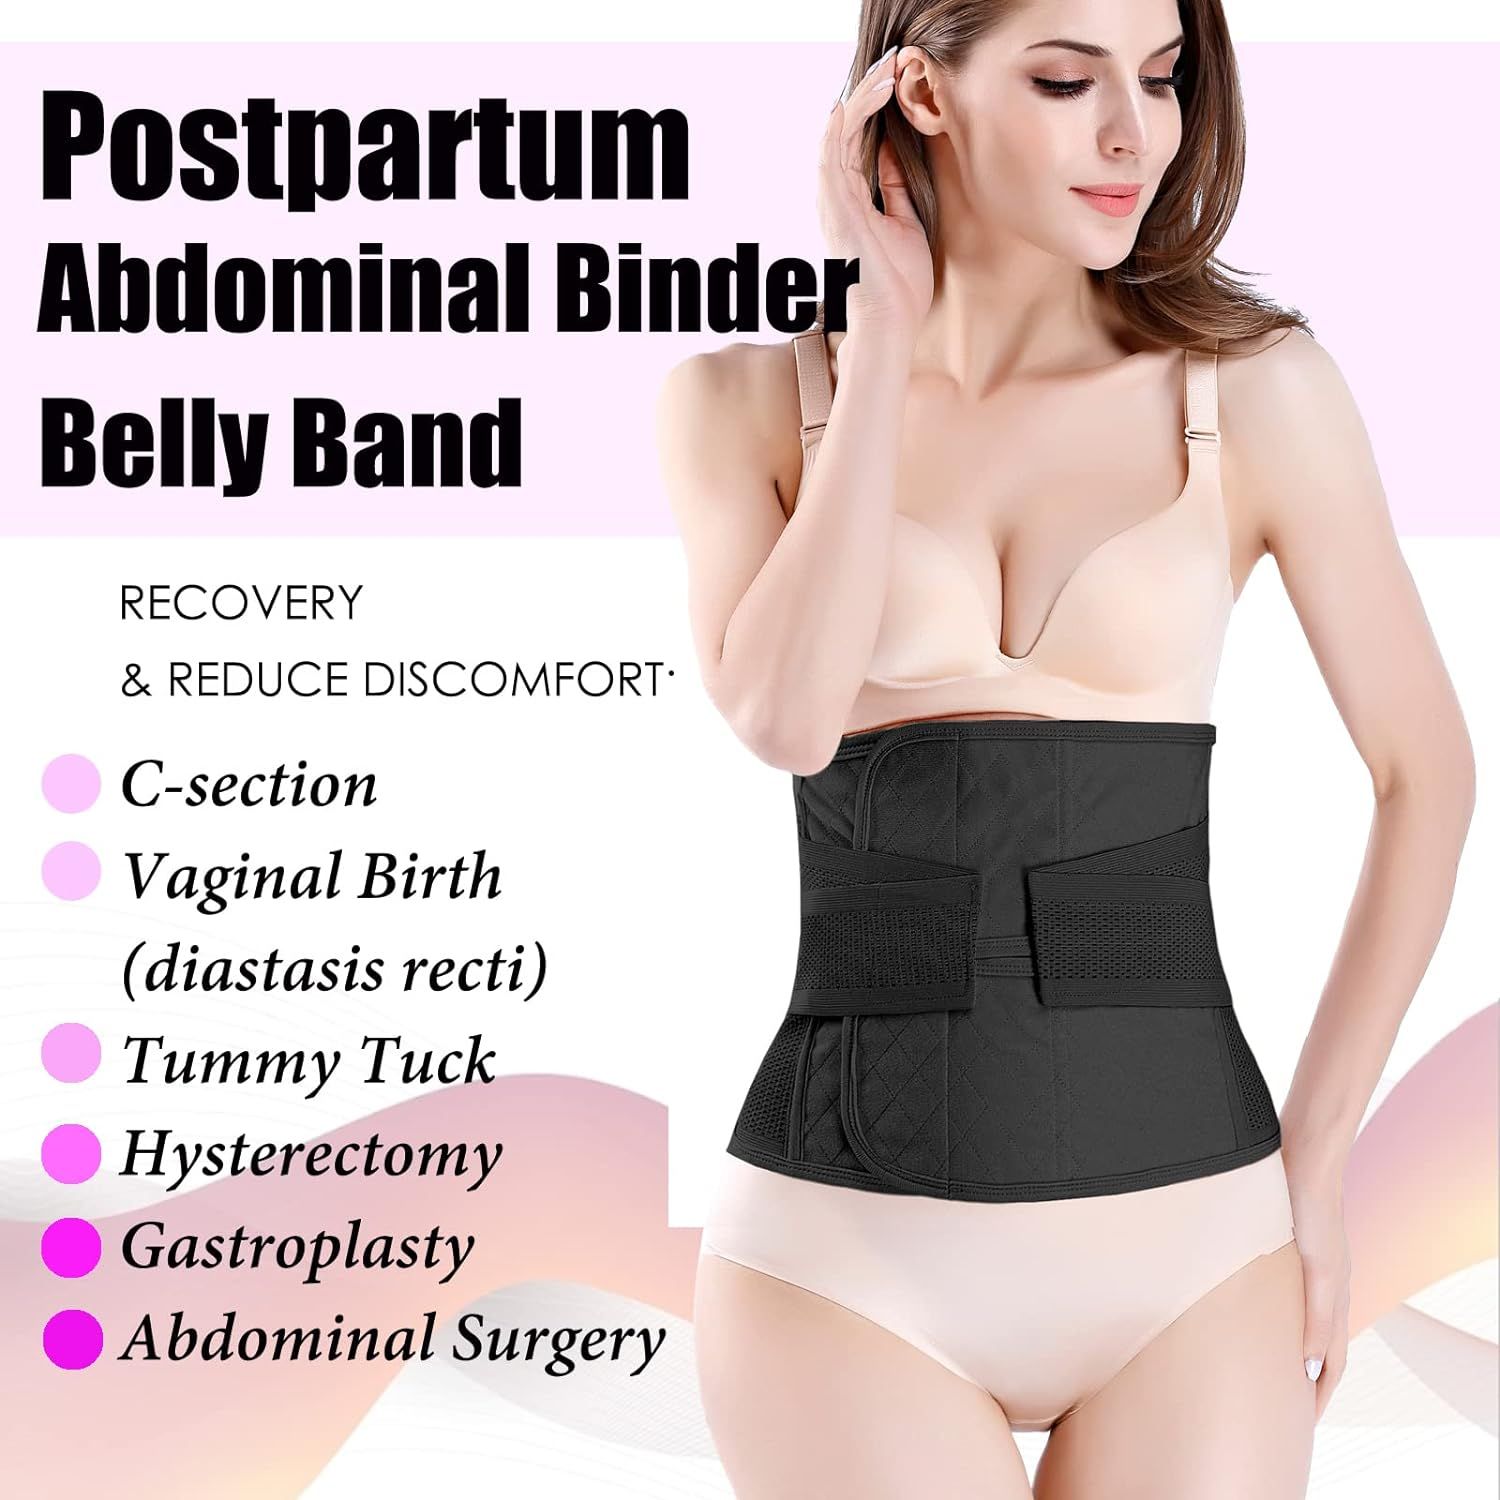 3 in 1 Postpartum Belly Support Recovery Wrap - Postpartum Belly Band After  Birth Brace Slimming Girdles Body Shaper Waist Shapewear Post Surgery  Pregnancy Belly Support Band (Midnight Black XL) XL Midnight Black